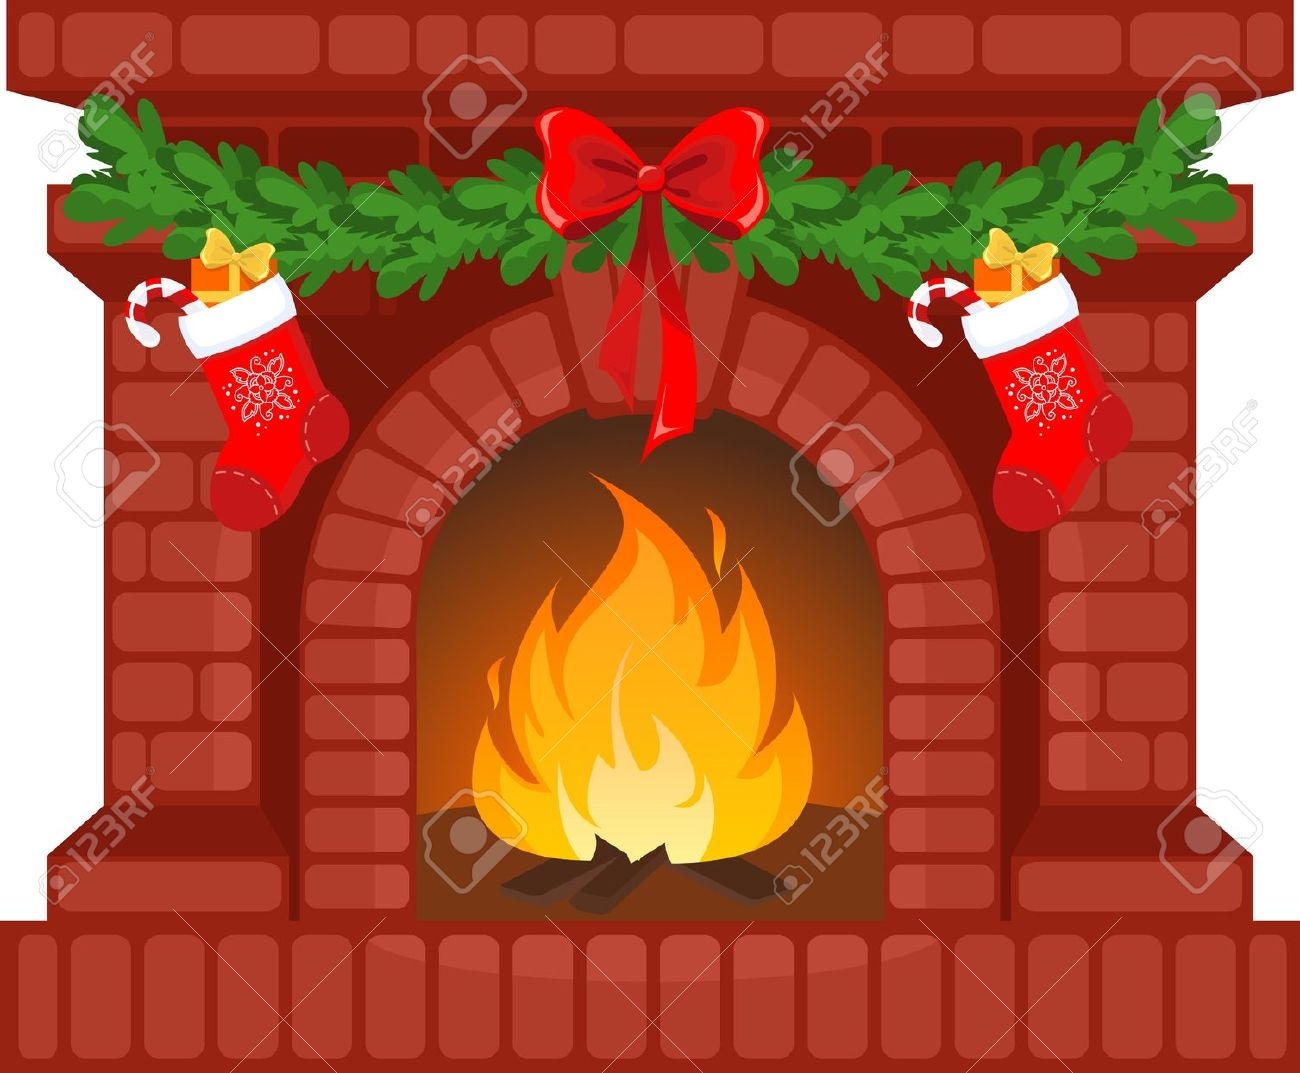 Fireplace clipart pictures id - Fireplace Clip Art